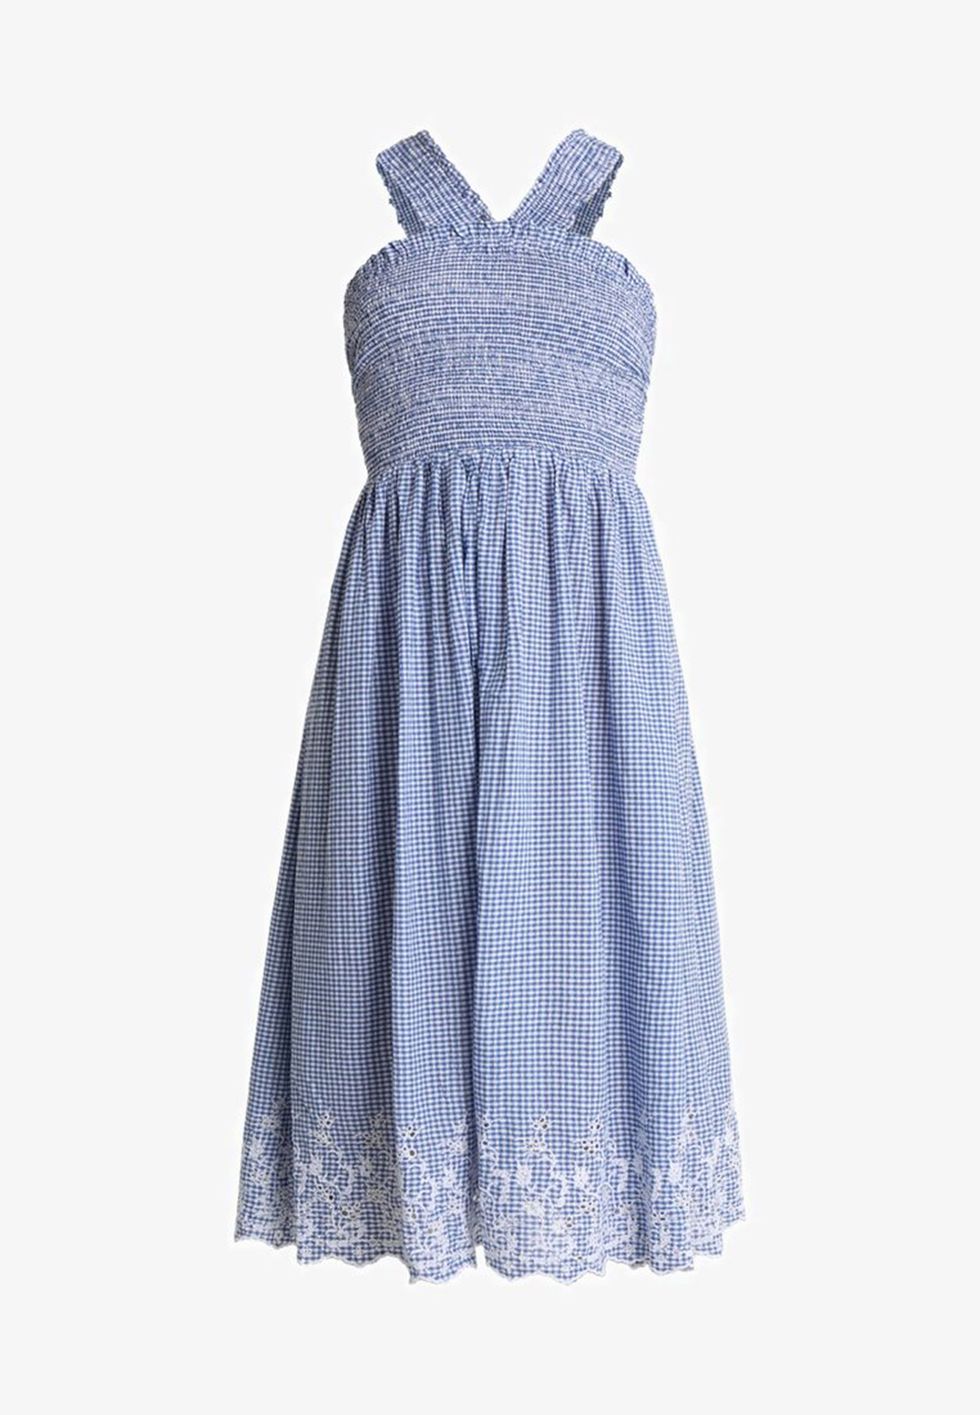 Clothing, Day dress, Dress, White, Blue, One-piece garment, Cocktail dress, Sleeve, A-line, Pattern, 